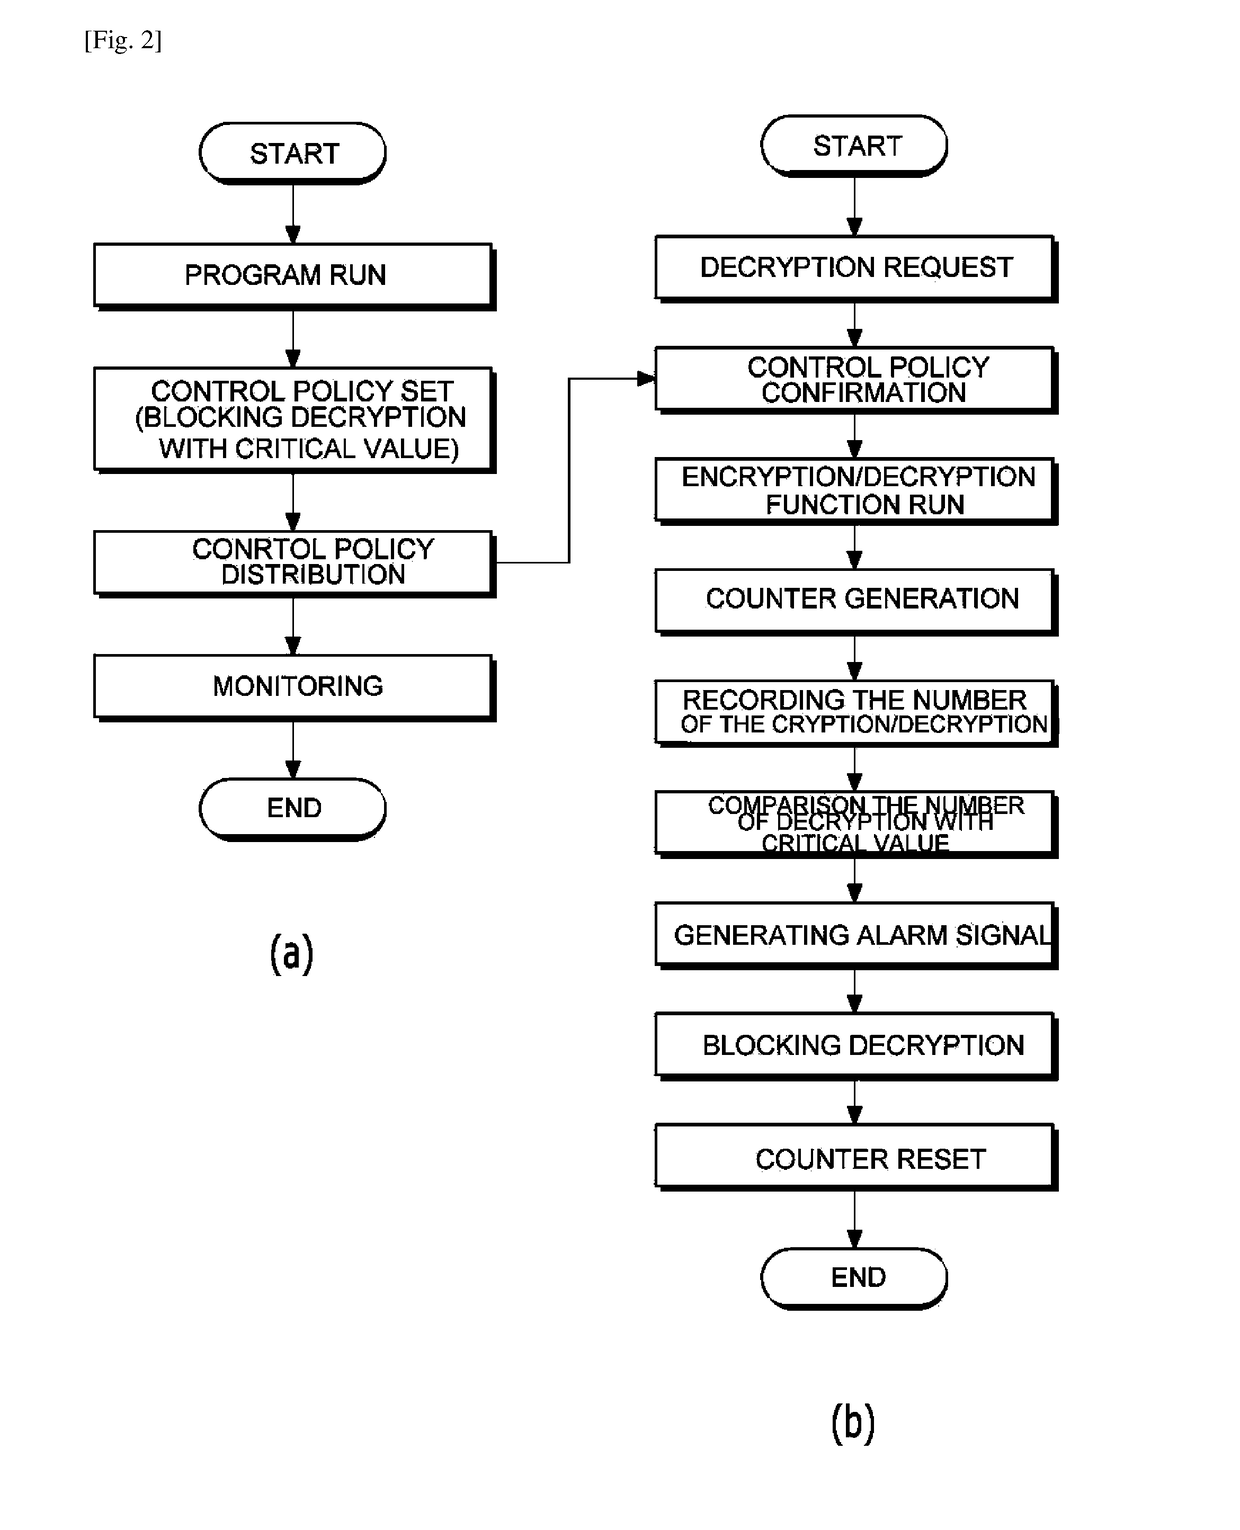 System and method for monitoring encrypted data and preventing massive decryption thereof